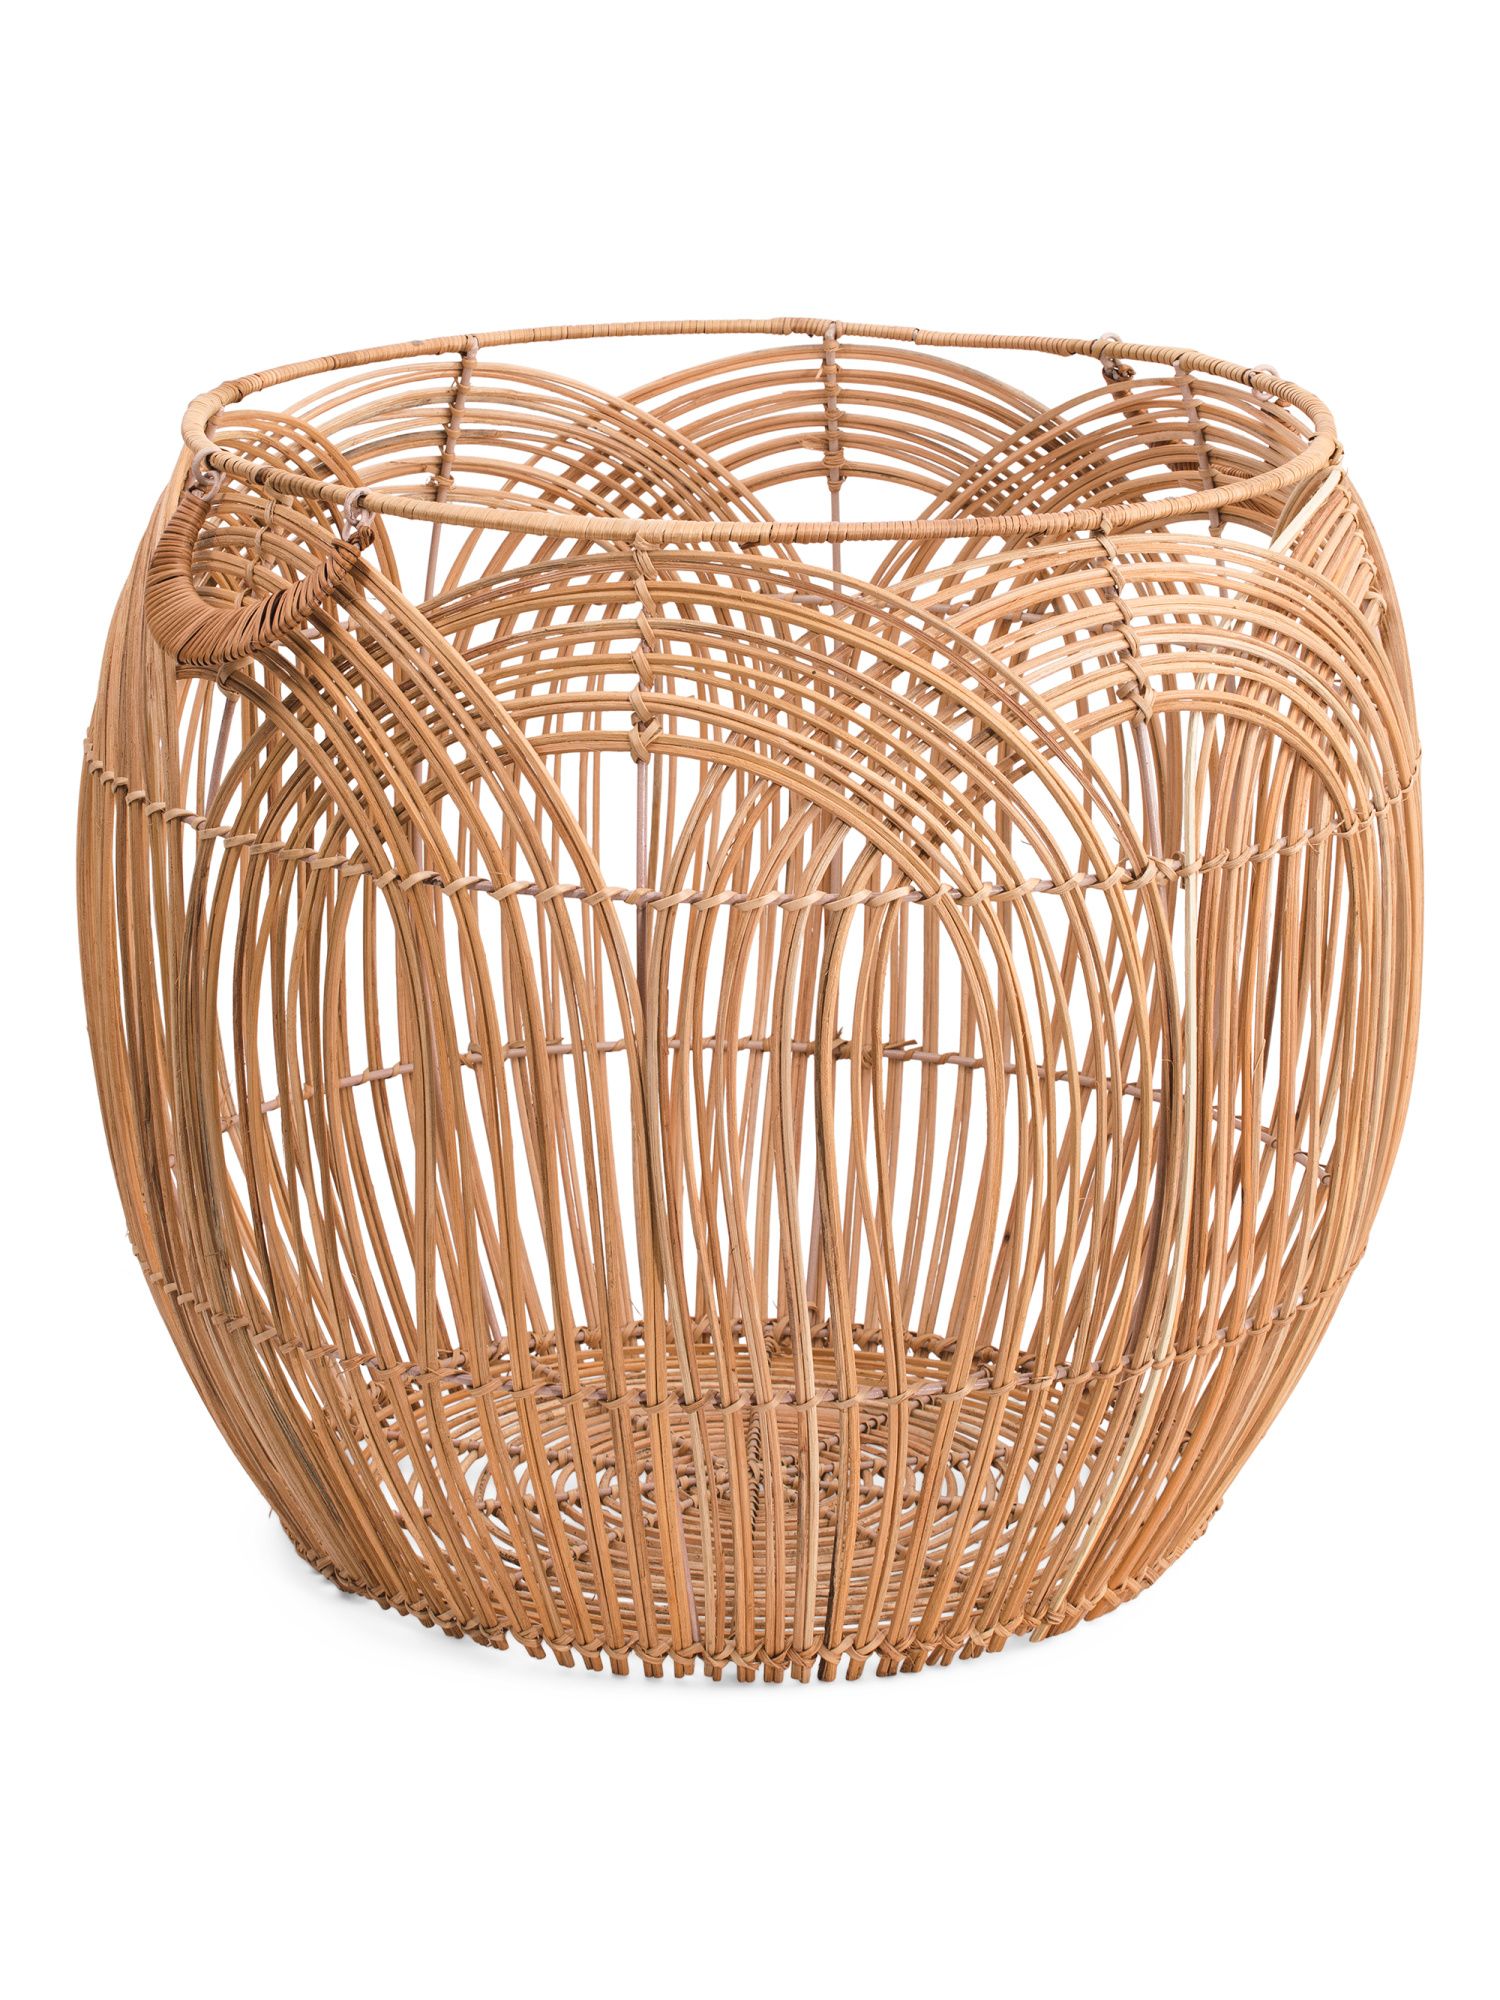 Extra Large Rattan Round Storage With Handles | TJ Maxx